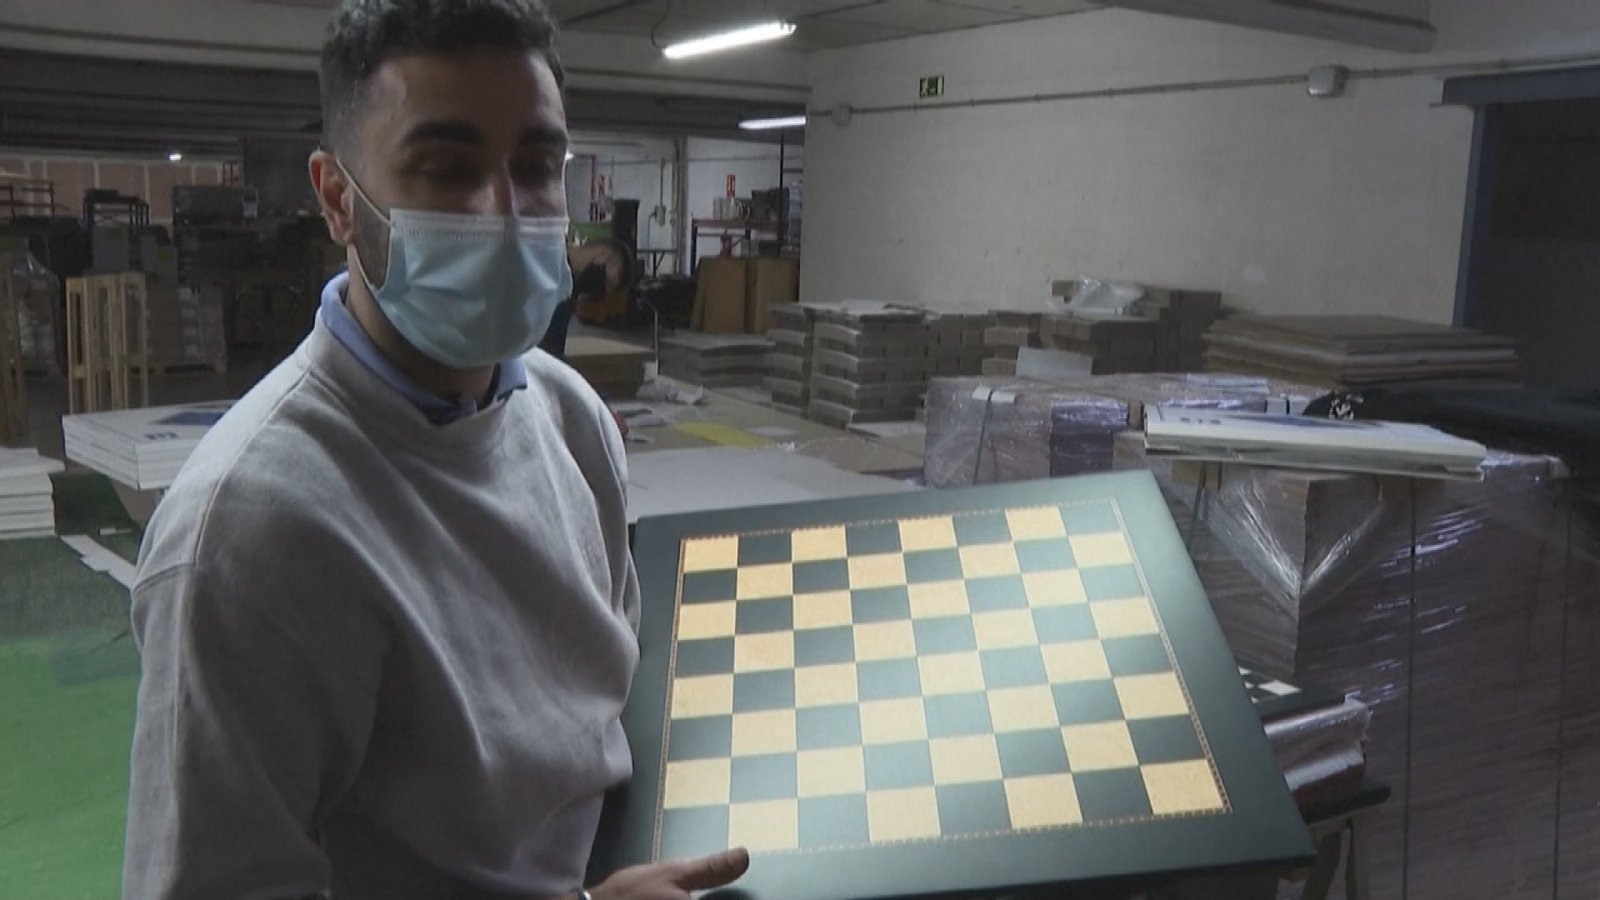 Spanish Chess Board Sales Soar after 'Queen's Gambit' Cameo